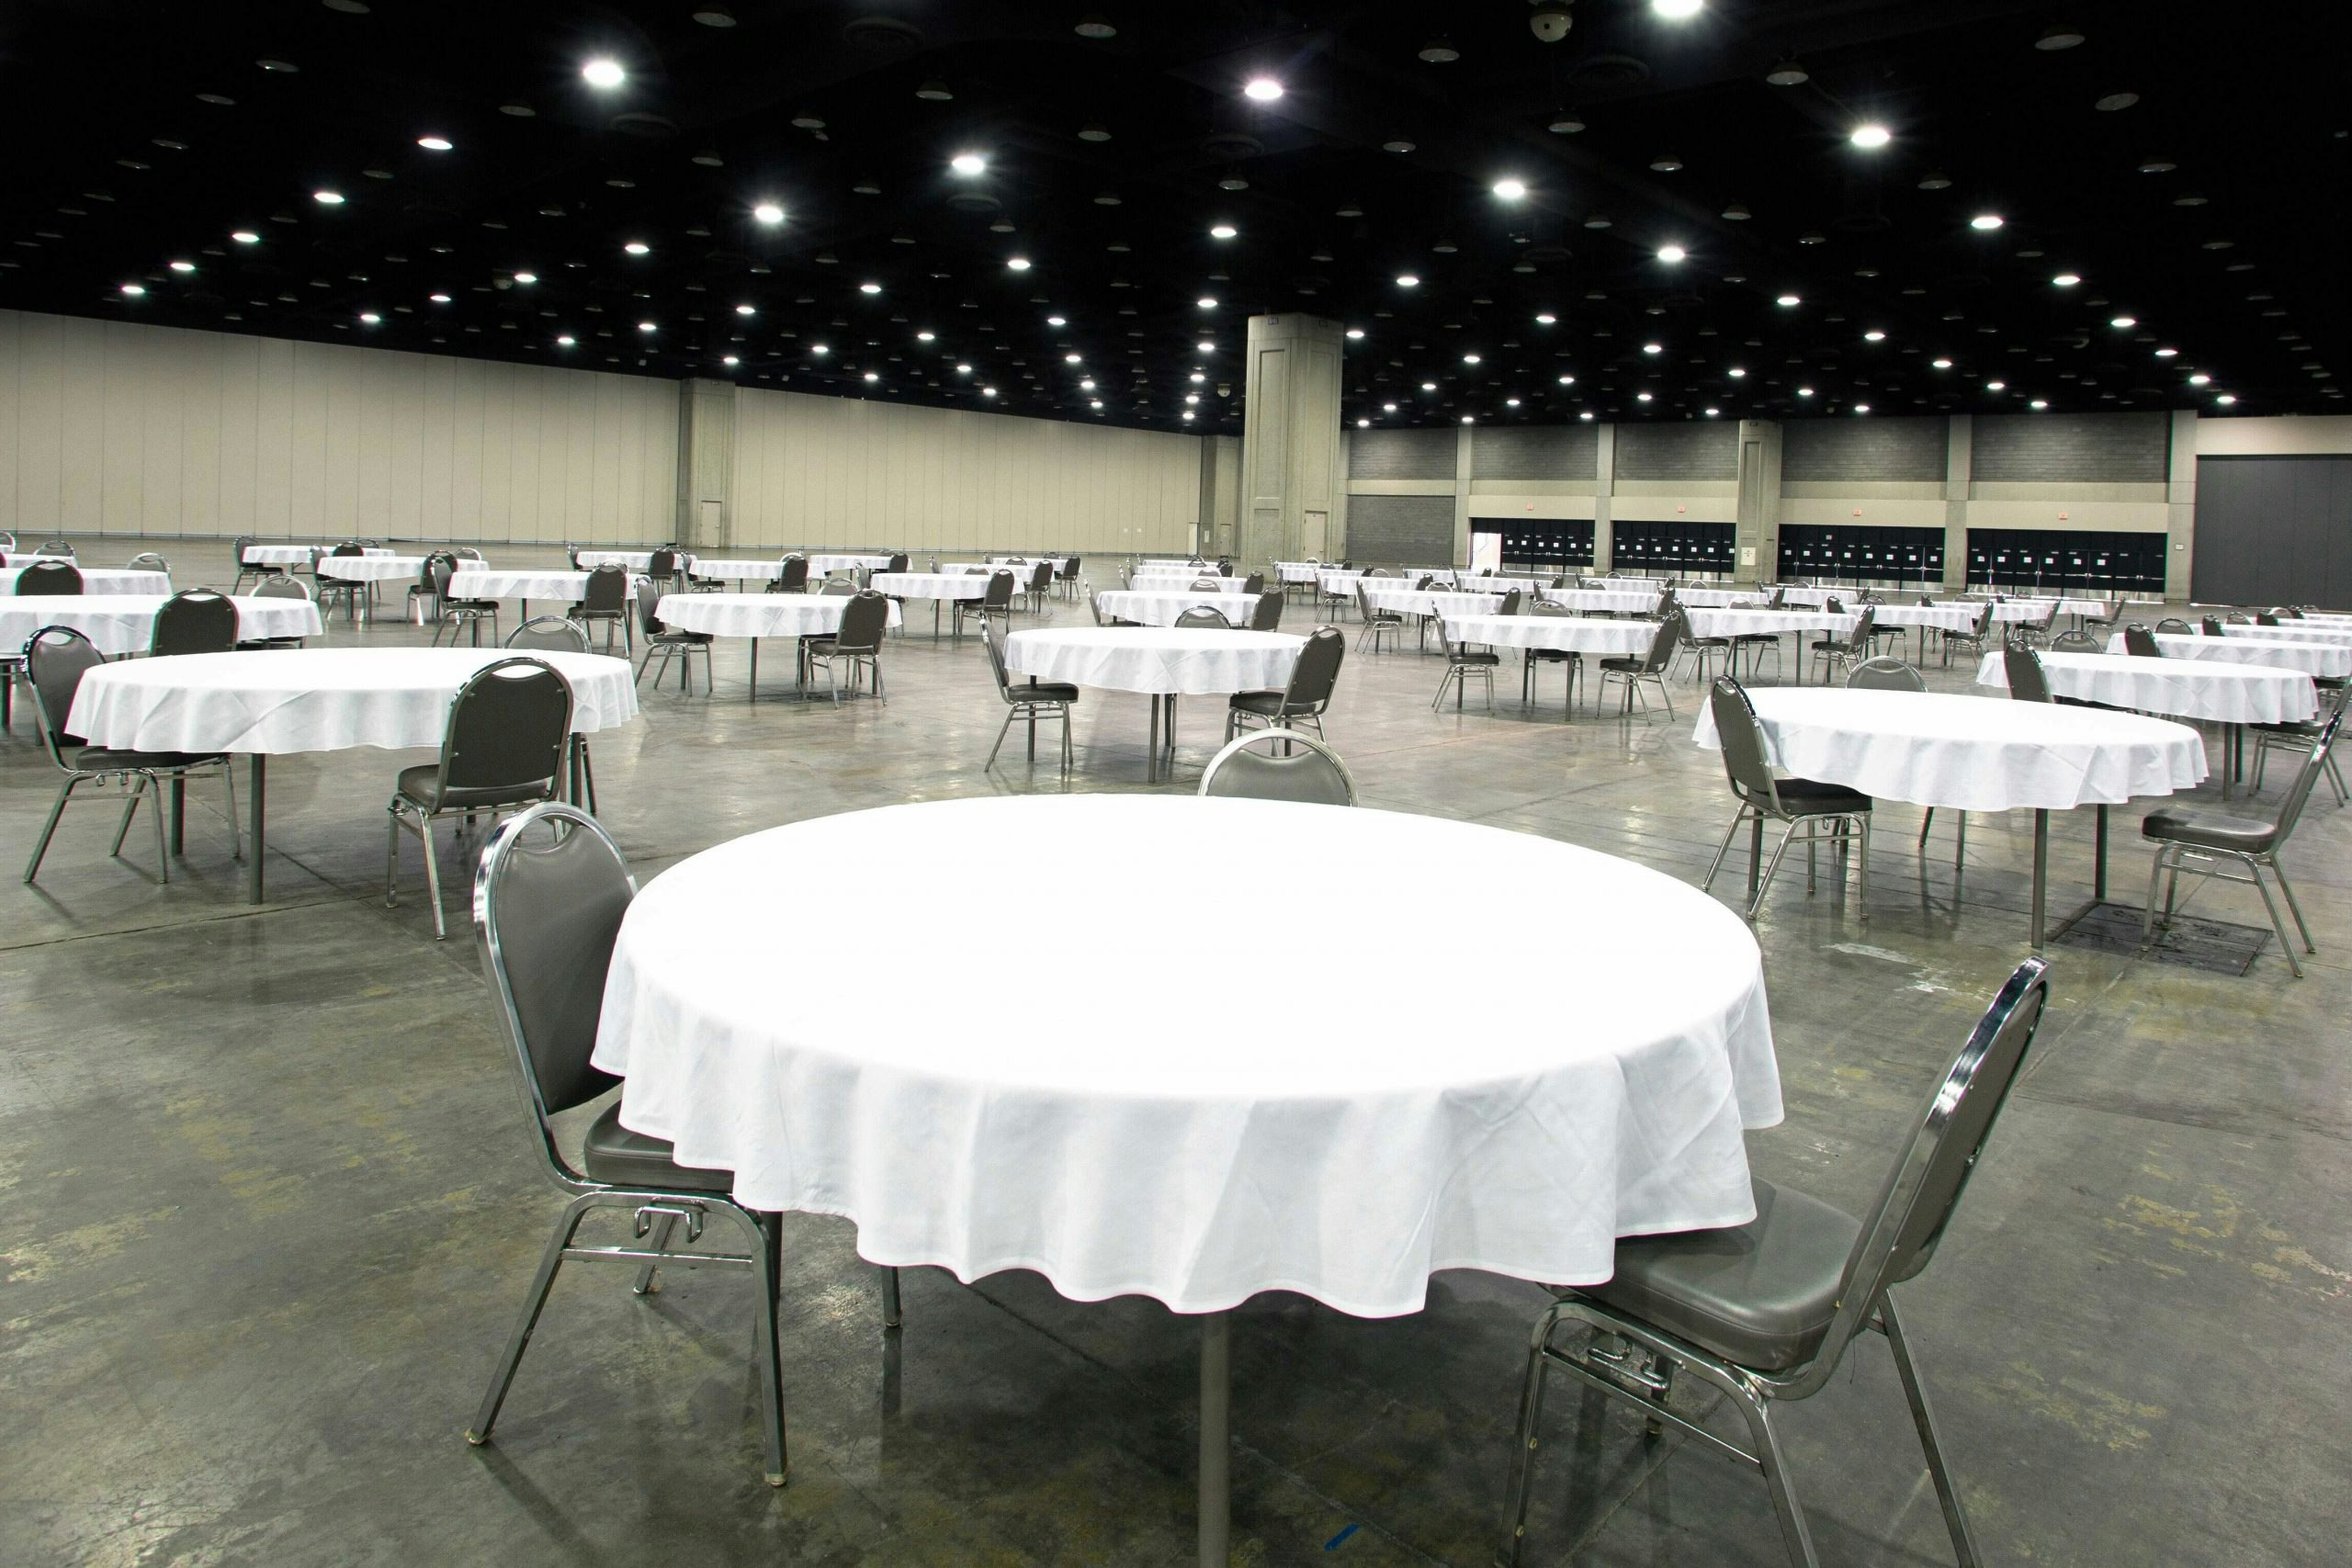 Plan your next event at the Kentucky Exposition Center